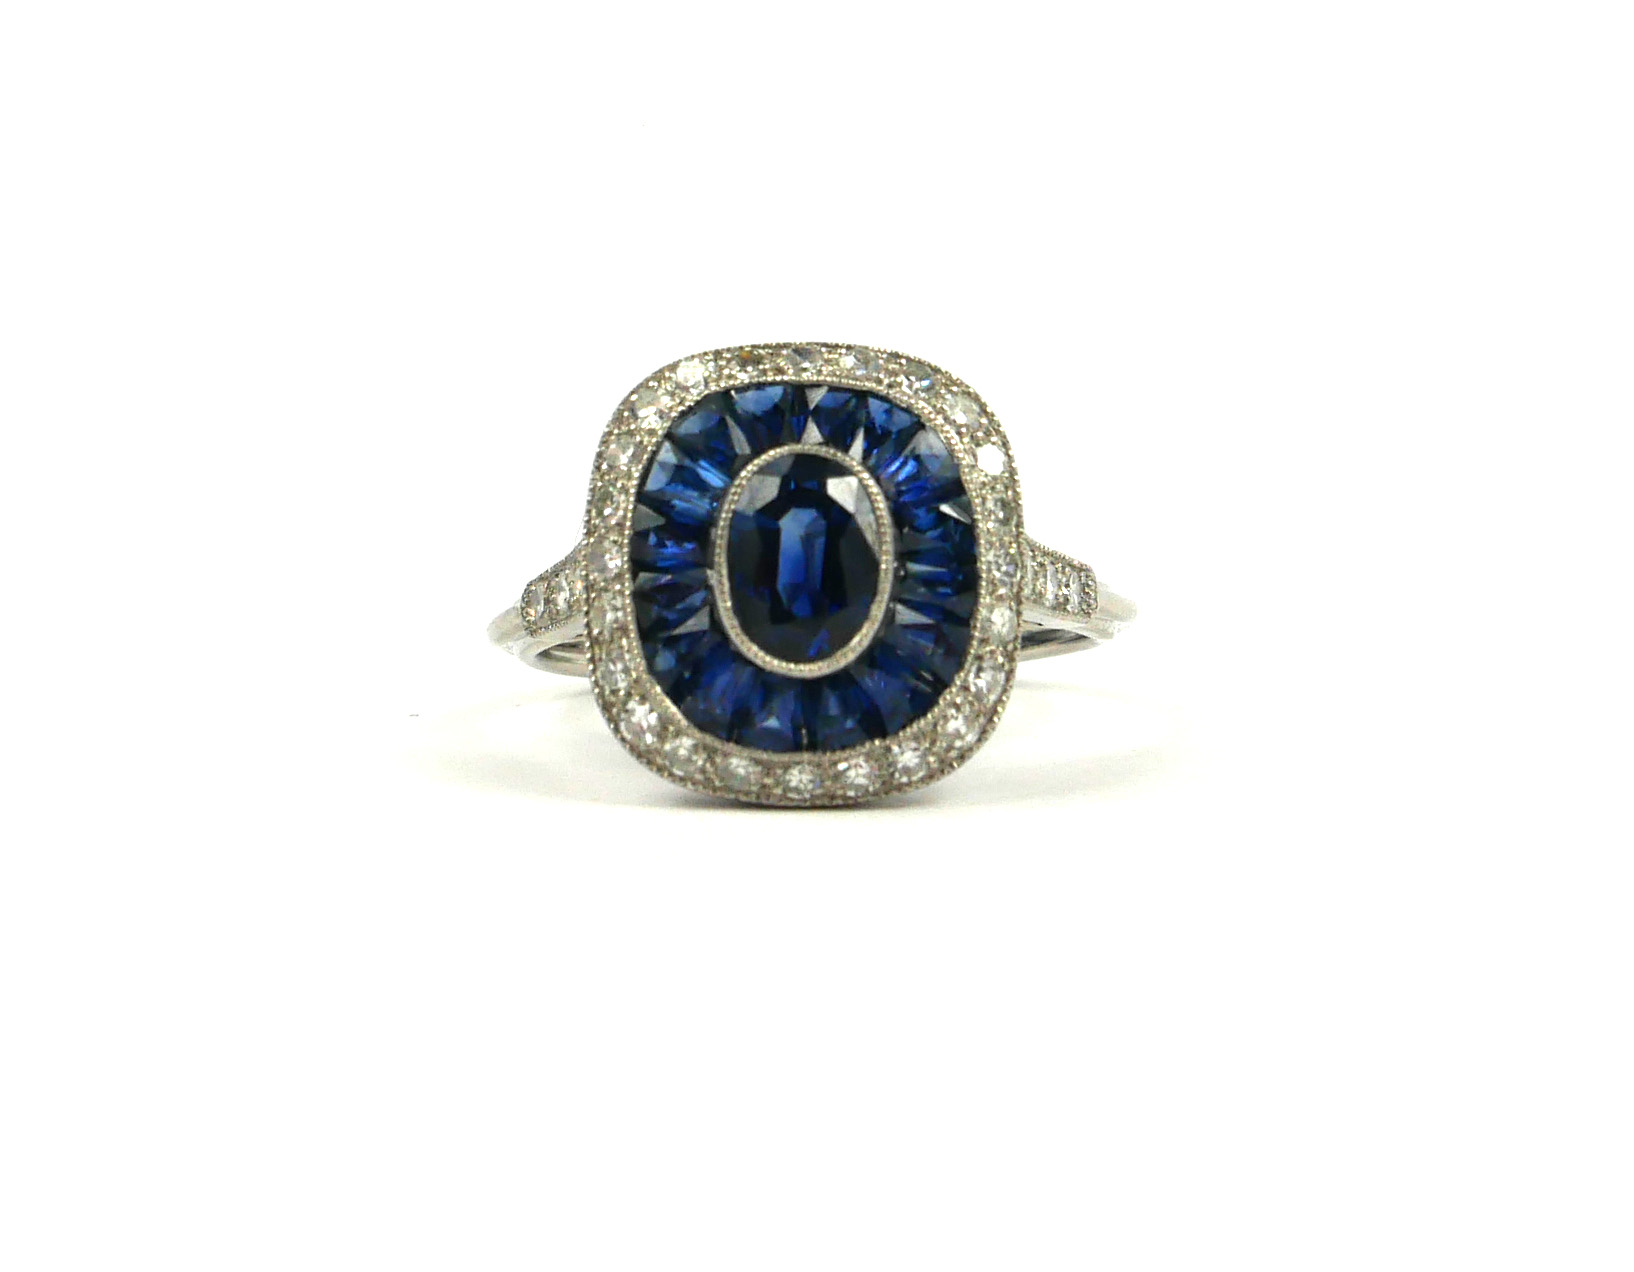 A PLATINUM ART DECO STYLE, SAPPHIRE AND DIAMOND RING. The Centre oval shaped sapphire surrounded